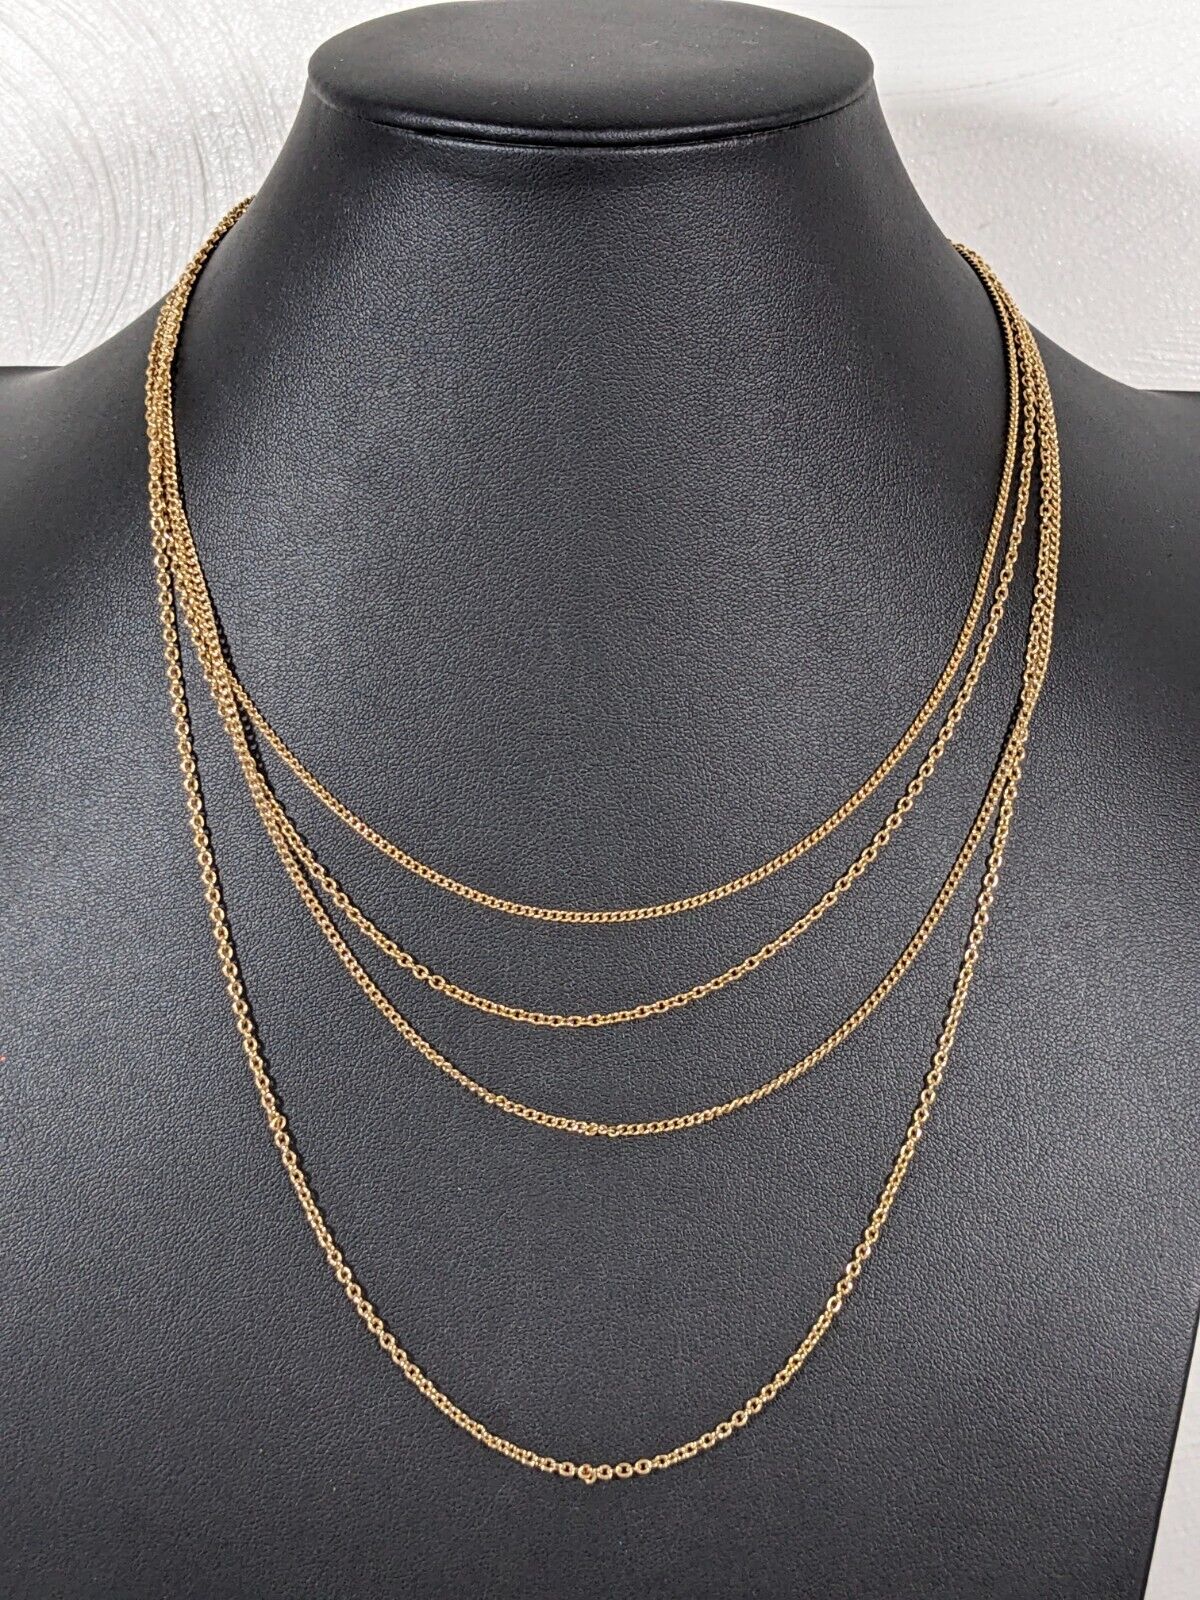 Vintage Artistry Amway Gold Tone Multi Chain Layered Necklace 17 inches Dainty